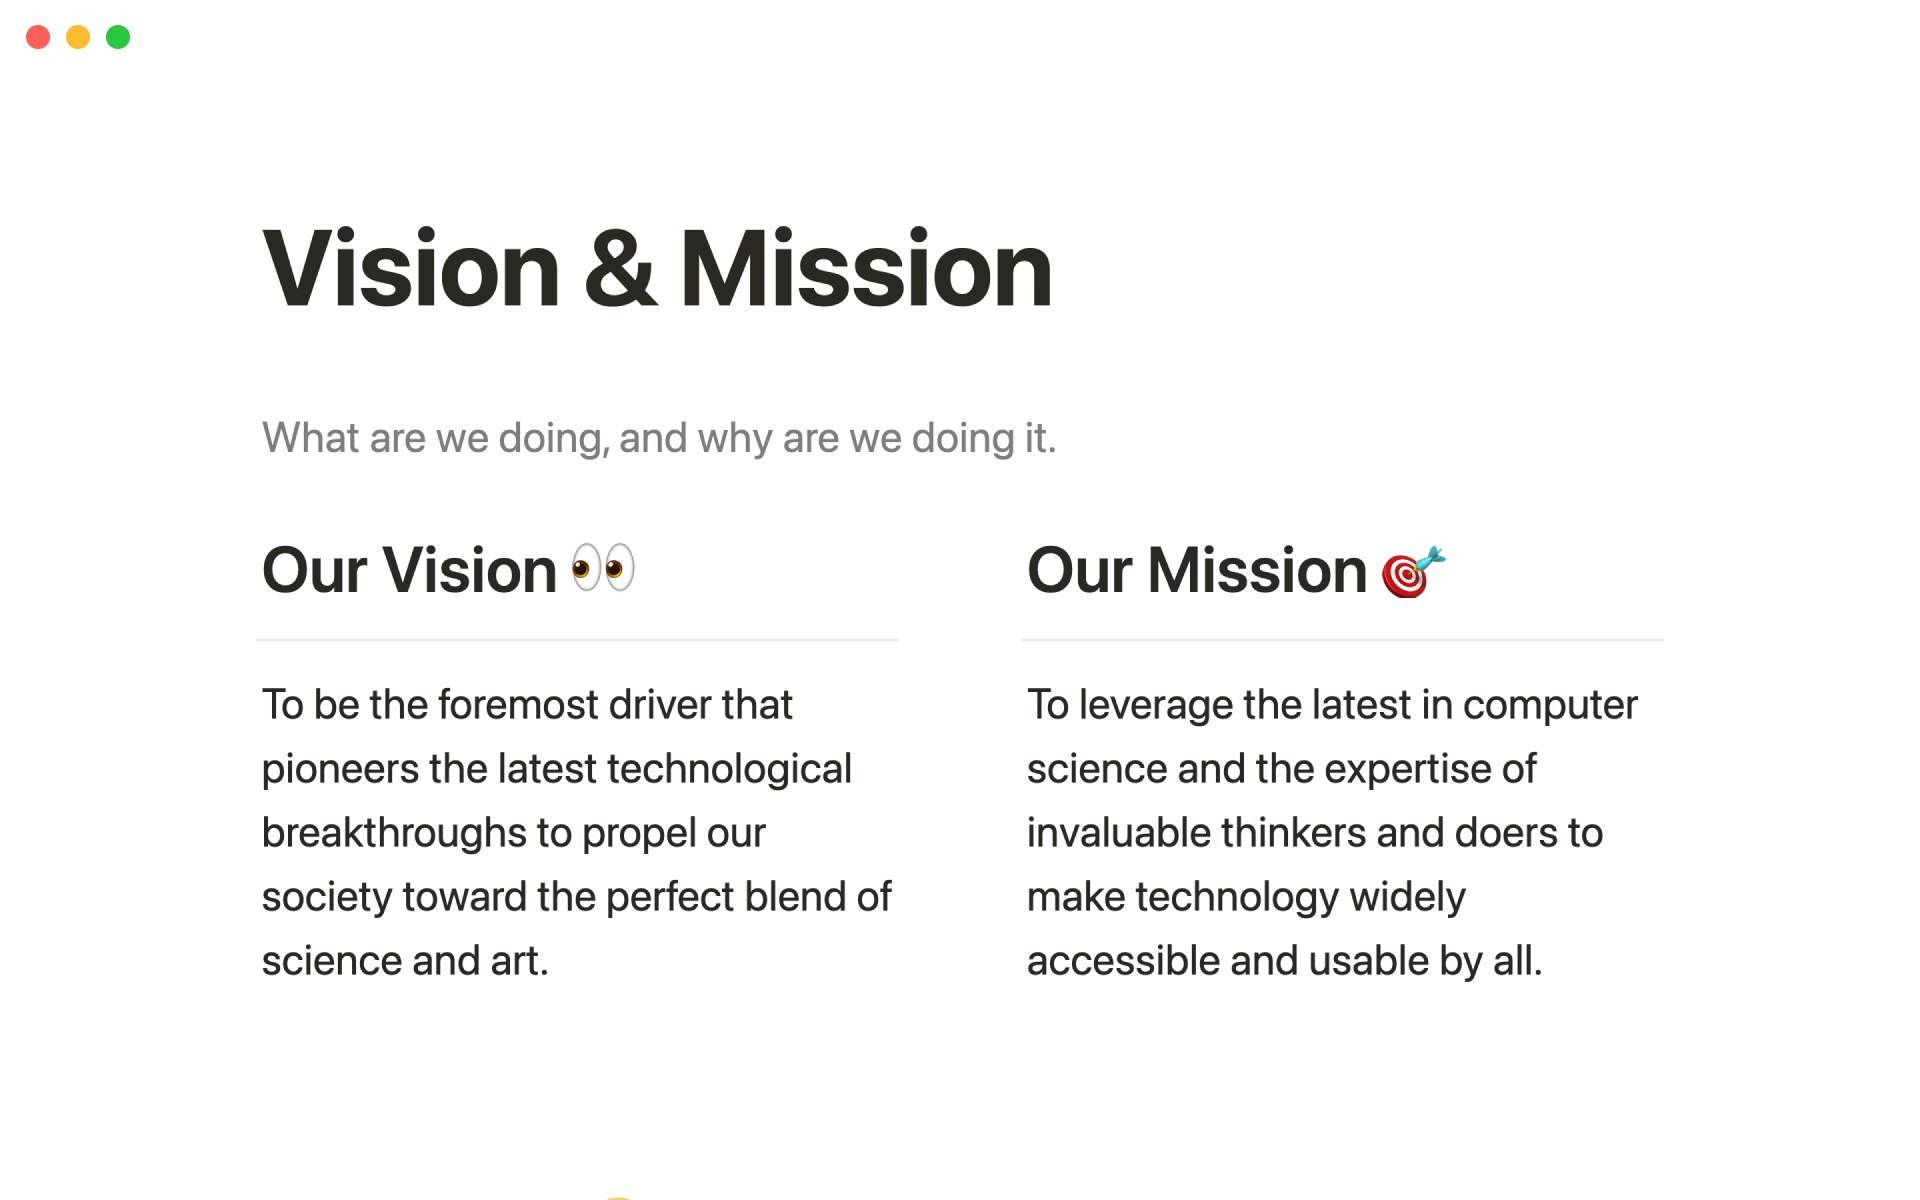 our mission image